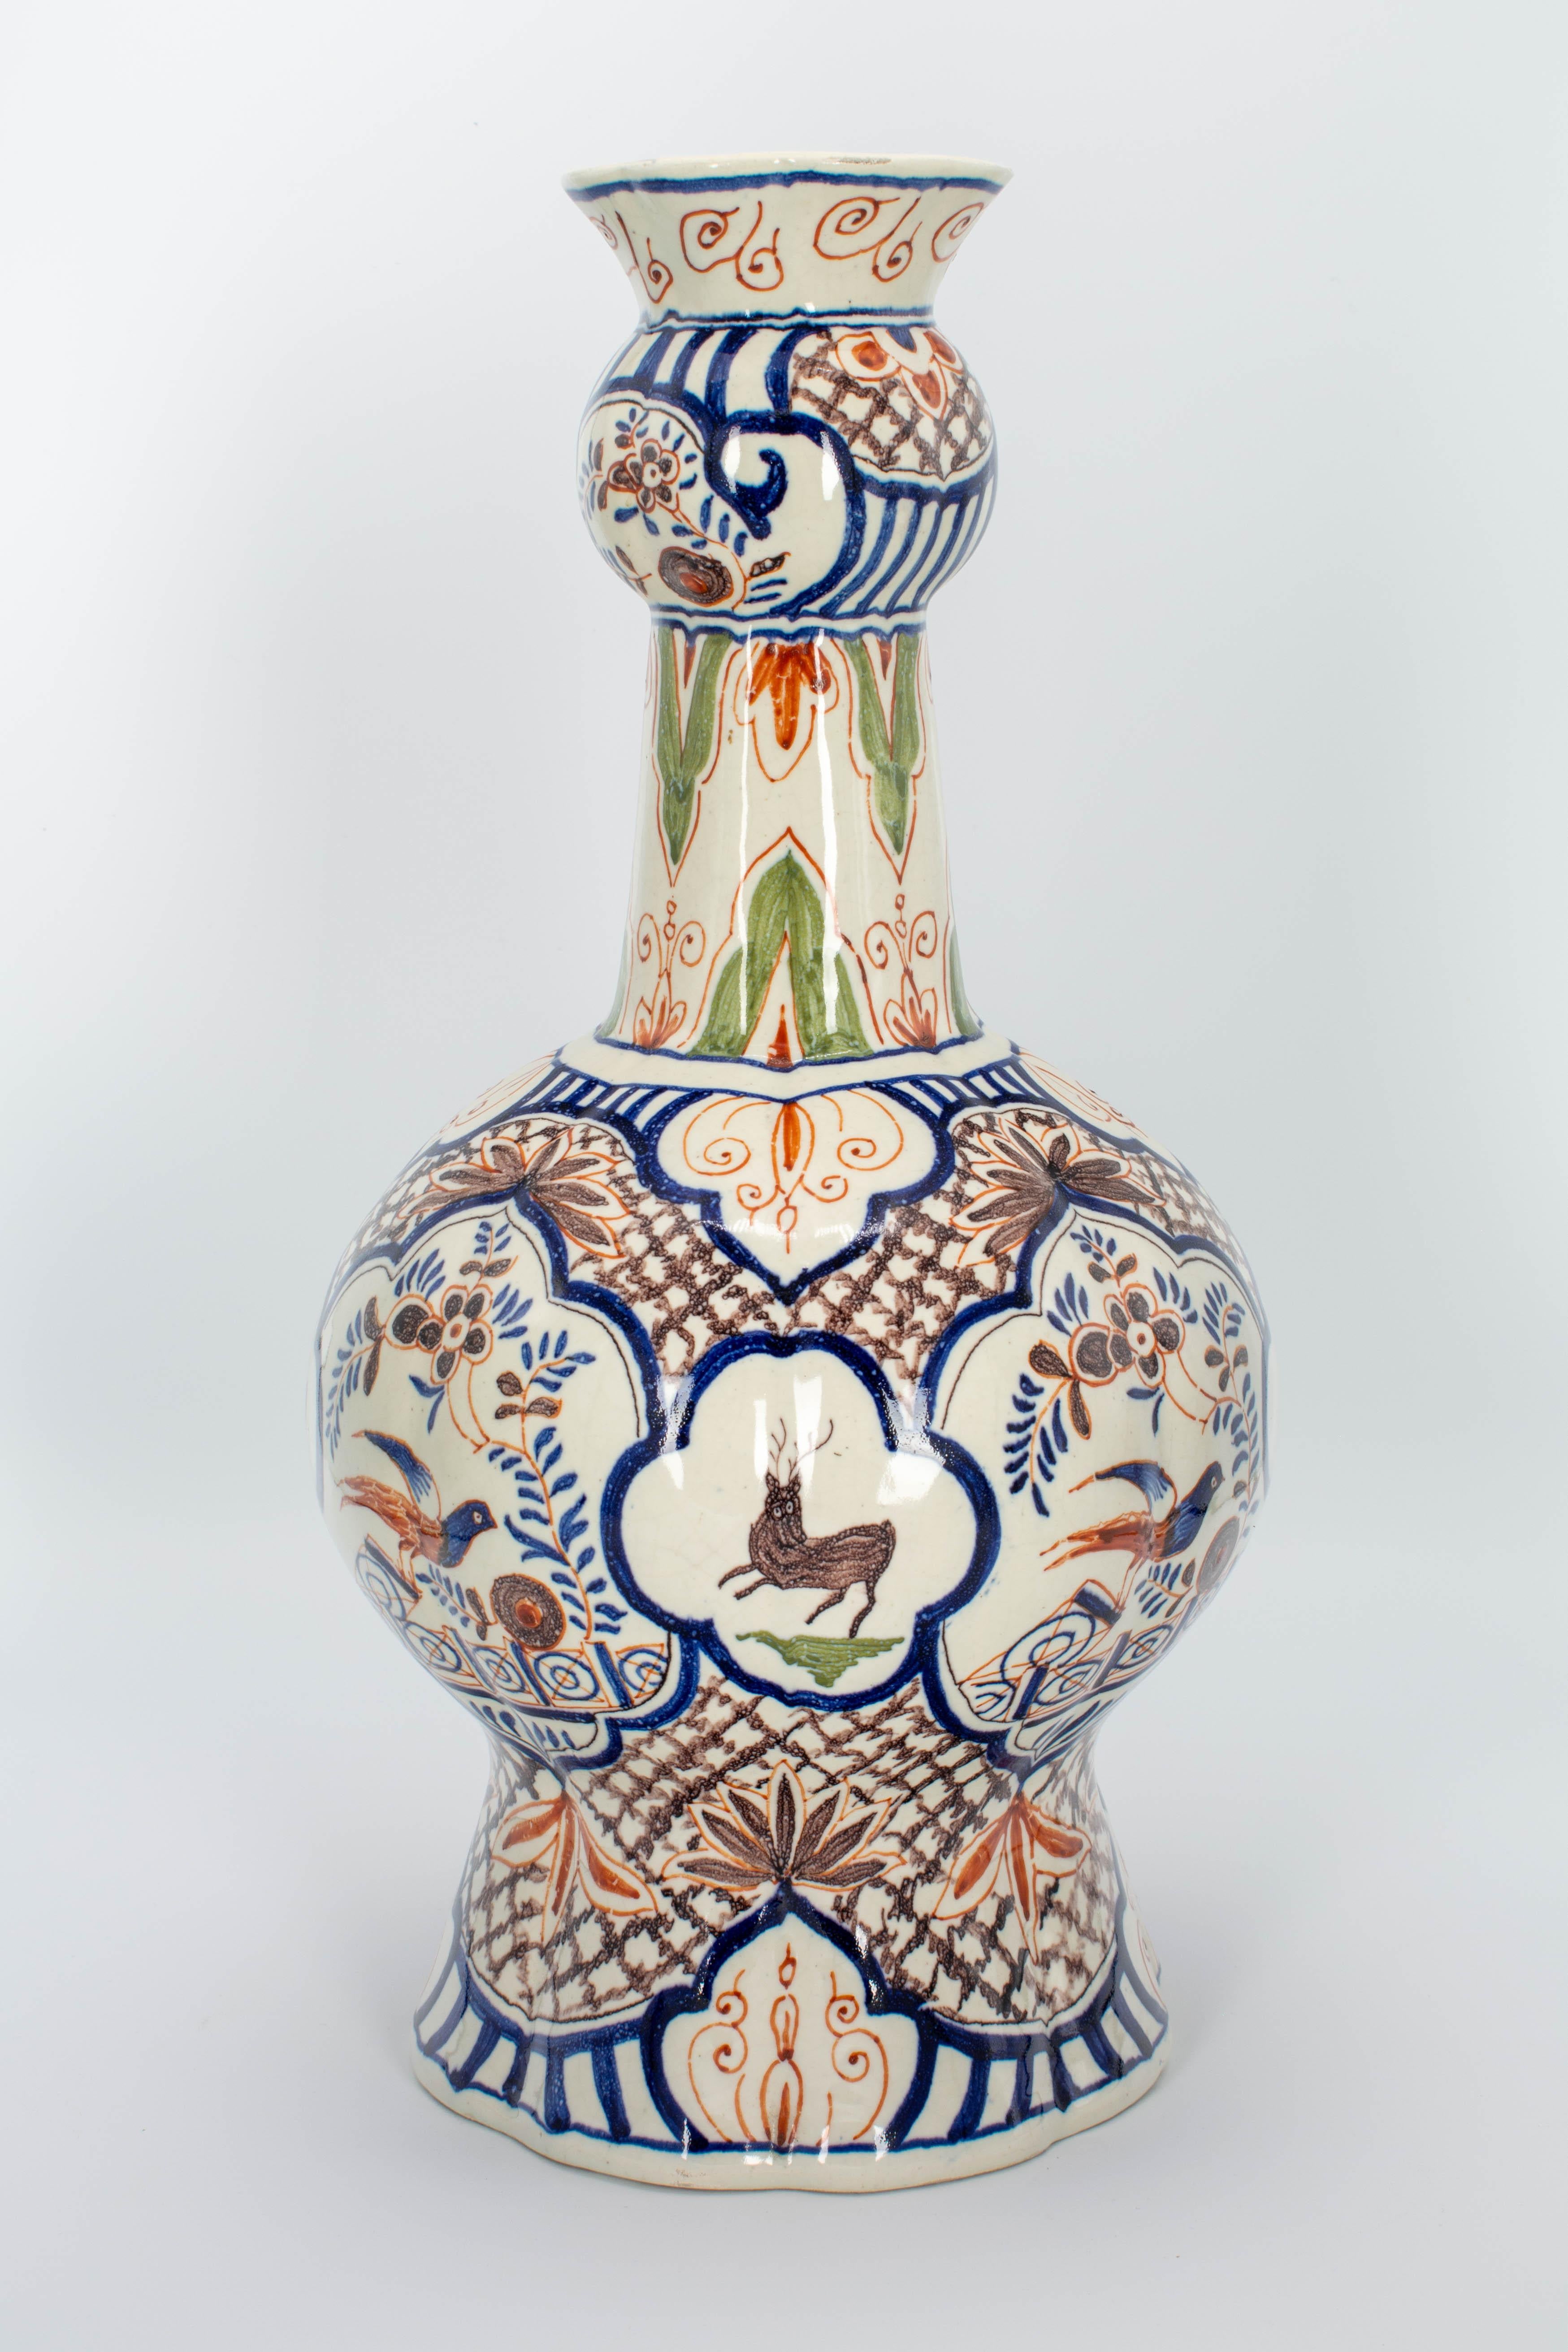 19th Century Delft Polychrome Faience Vase In Good Condition For Sale In Winter Park, FL